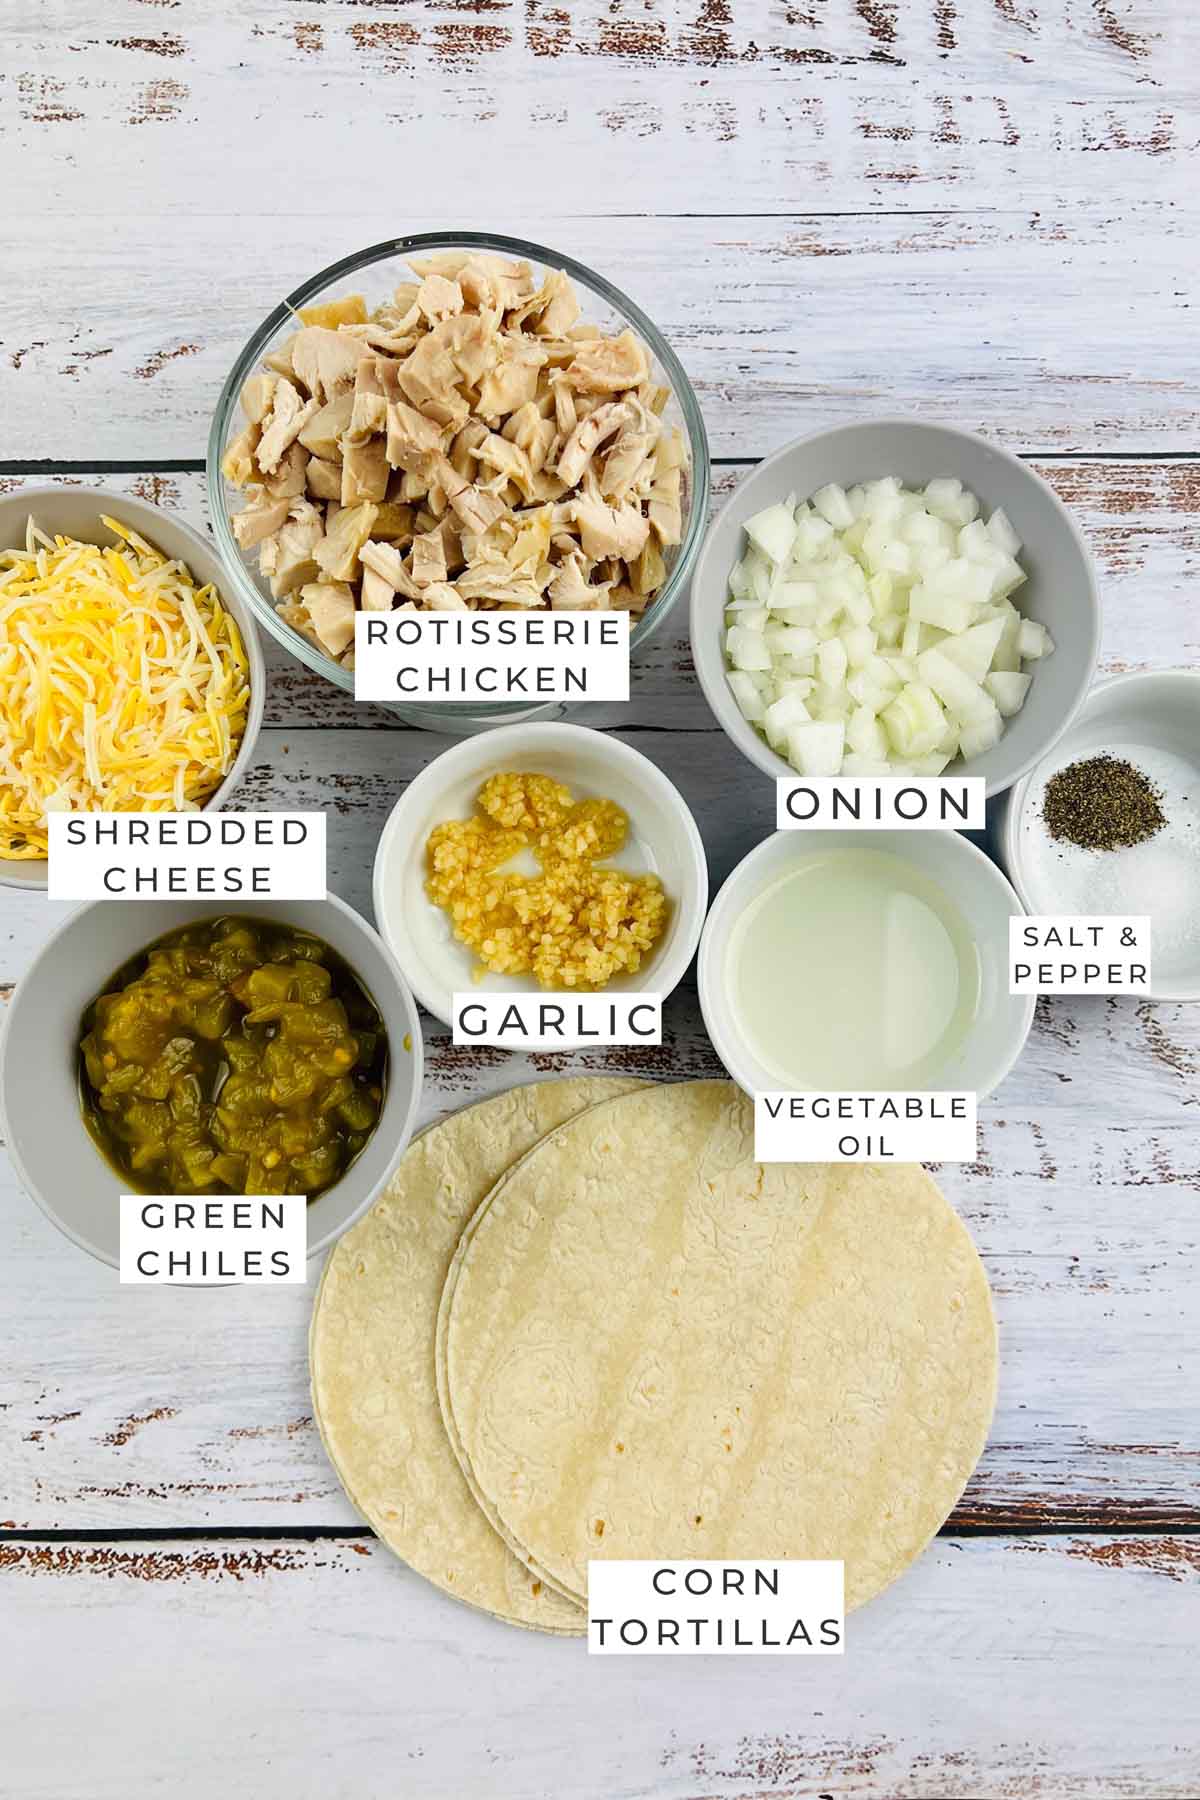 Labeled ingredients for the taquitos. 